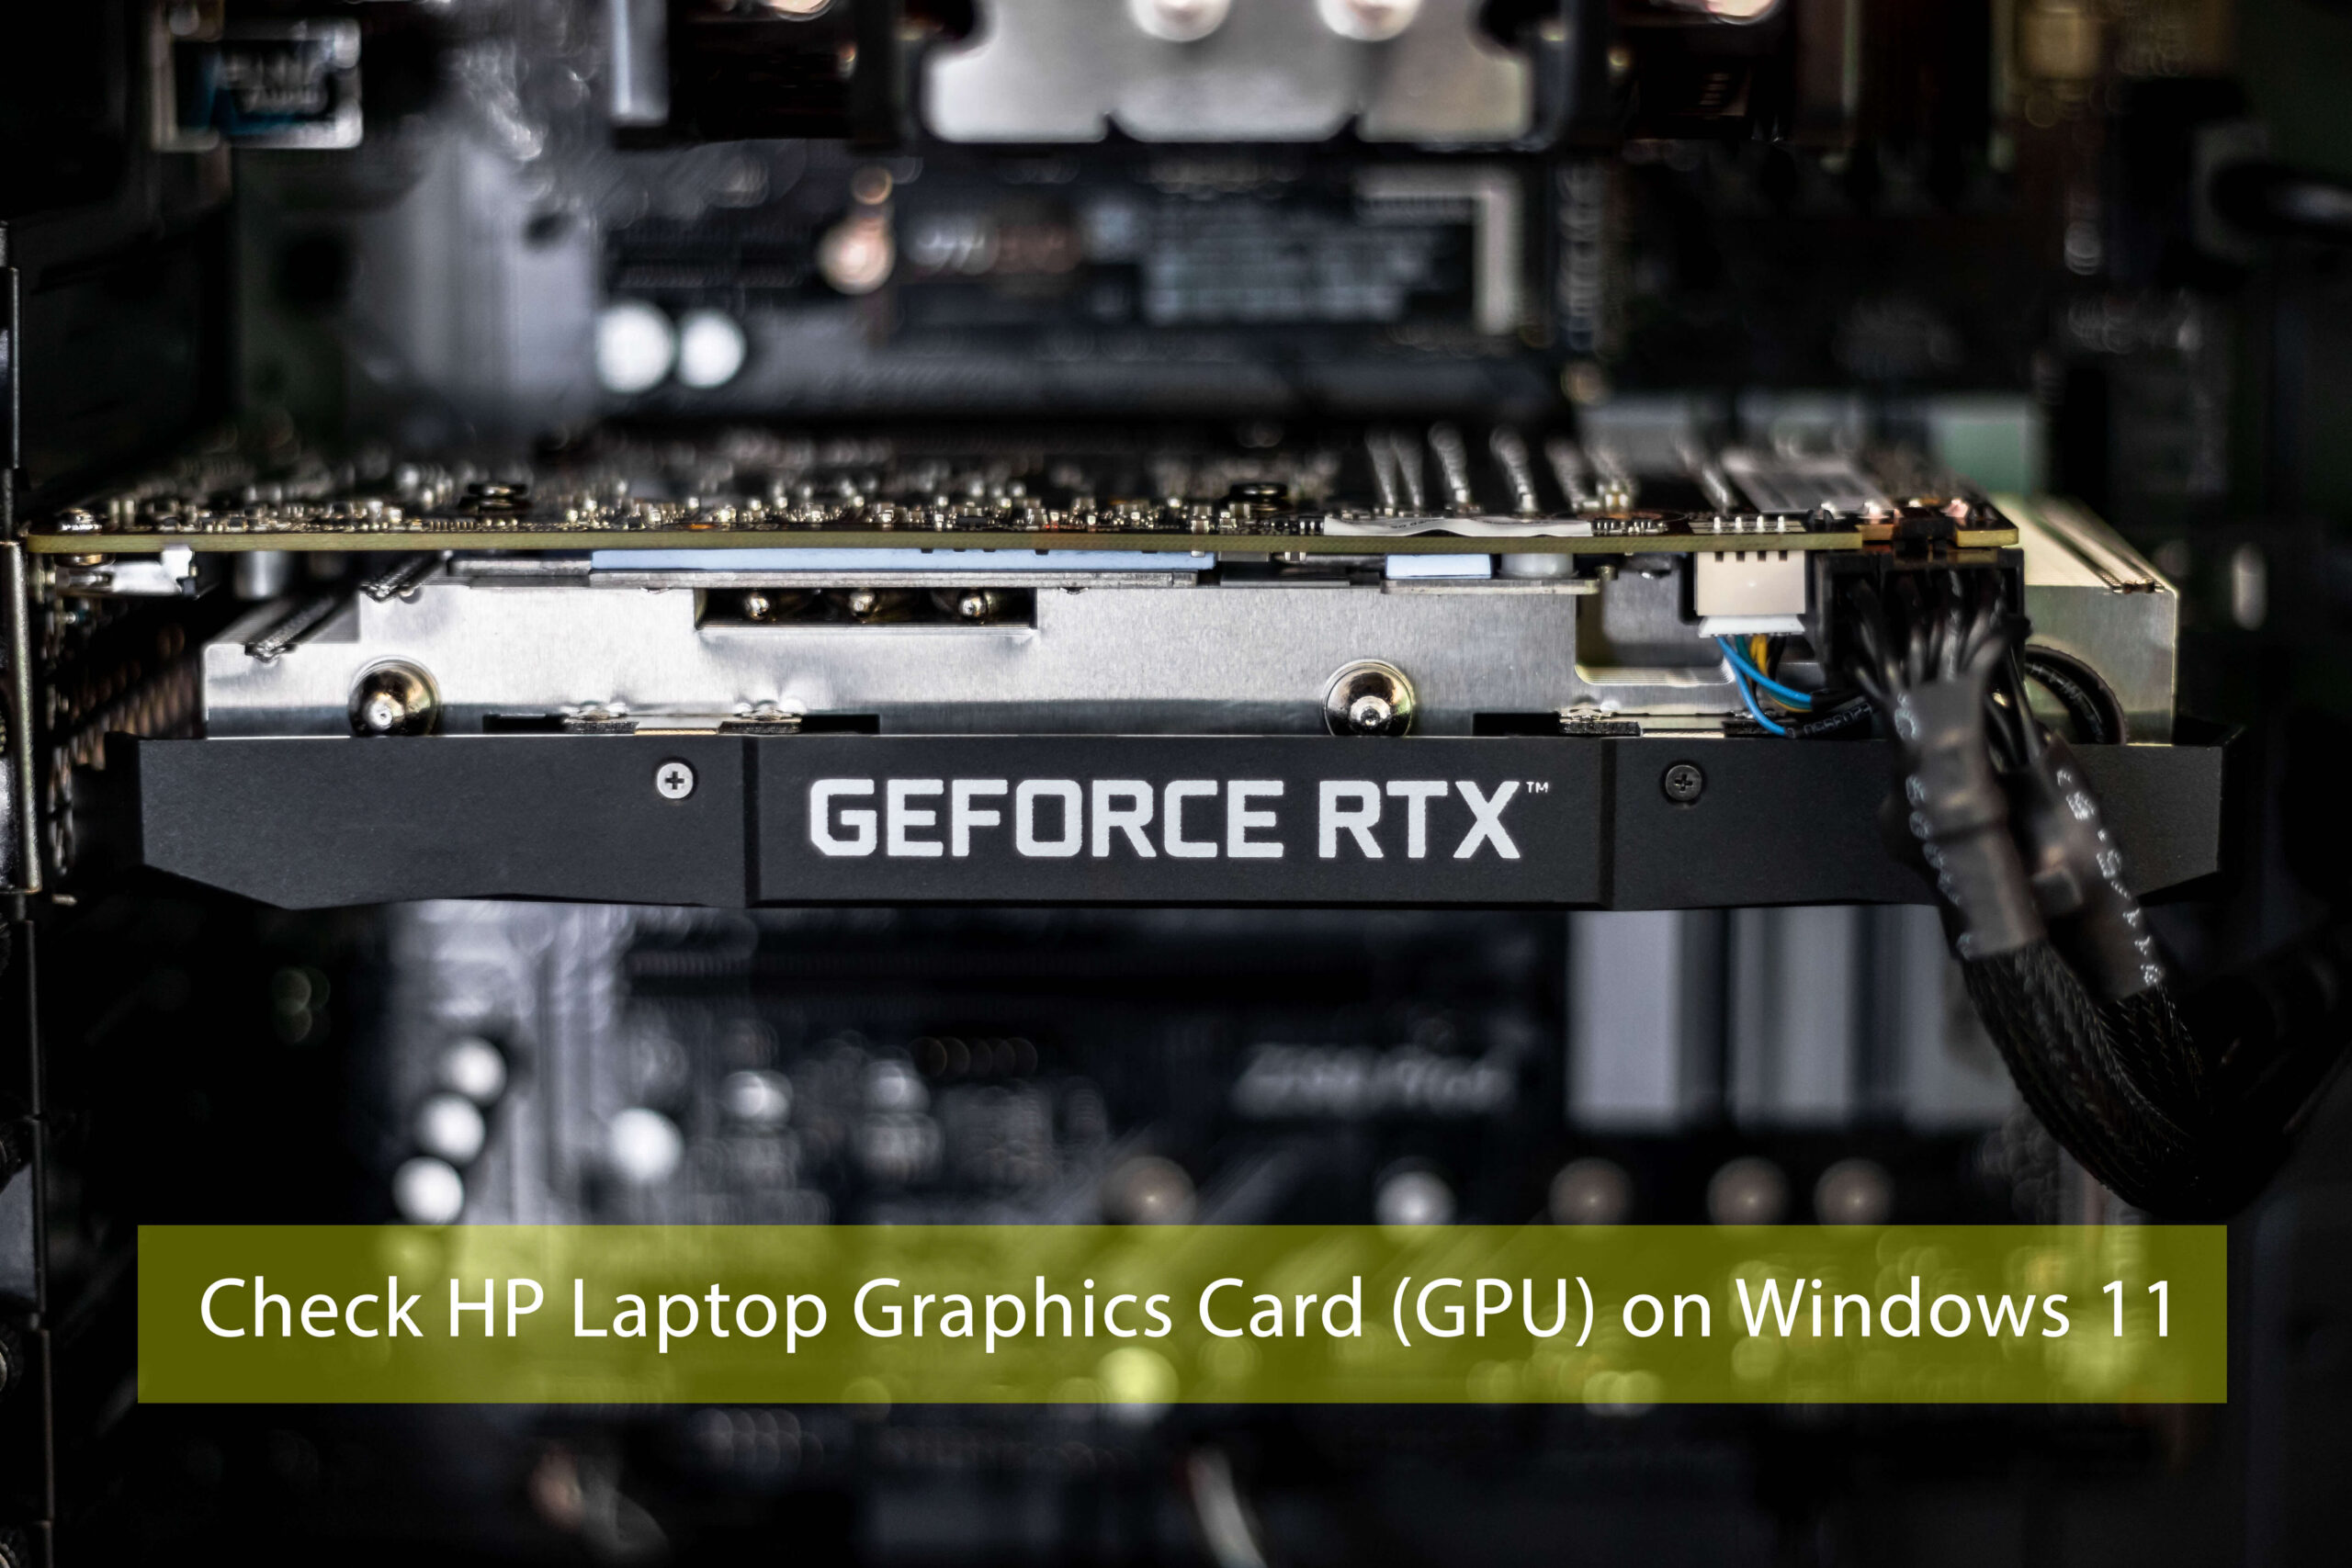 How to Check HP Laptop Graphics Card (GPU) on Windows 11 (Dell, Acer)